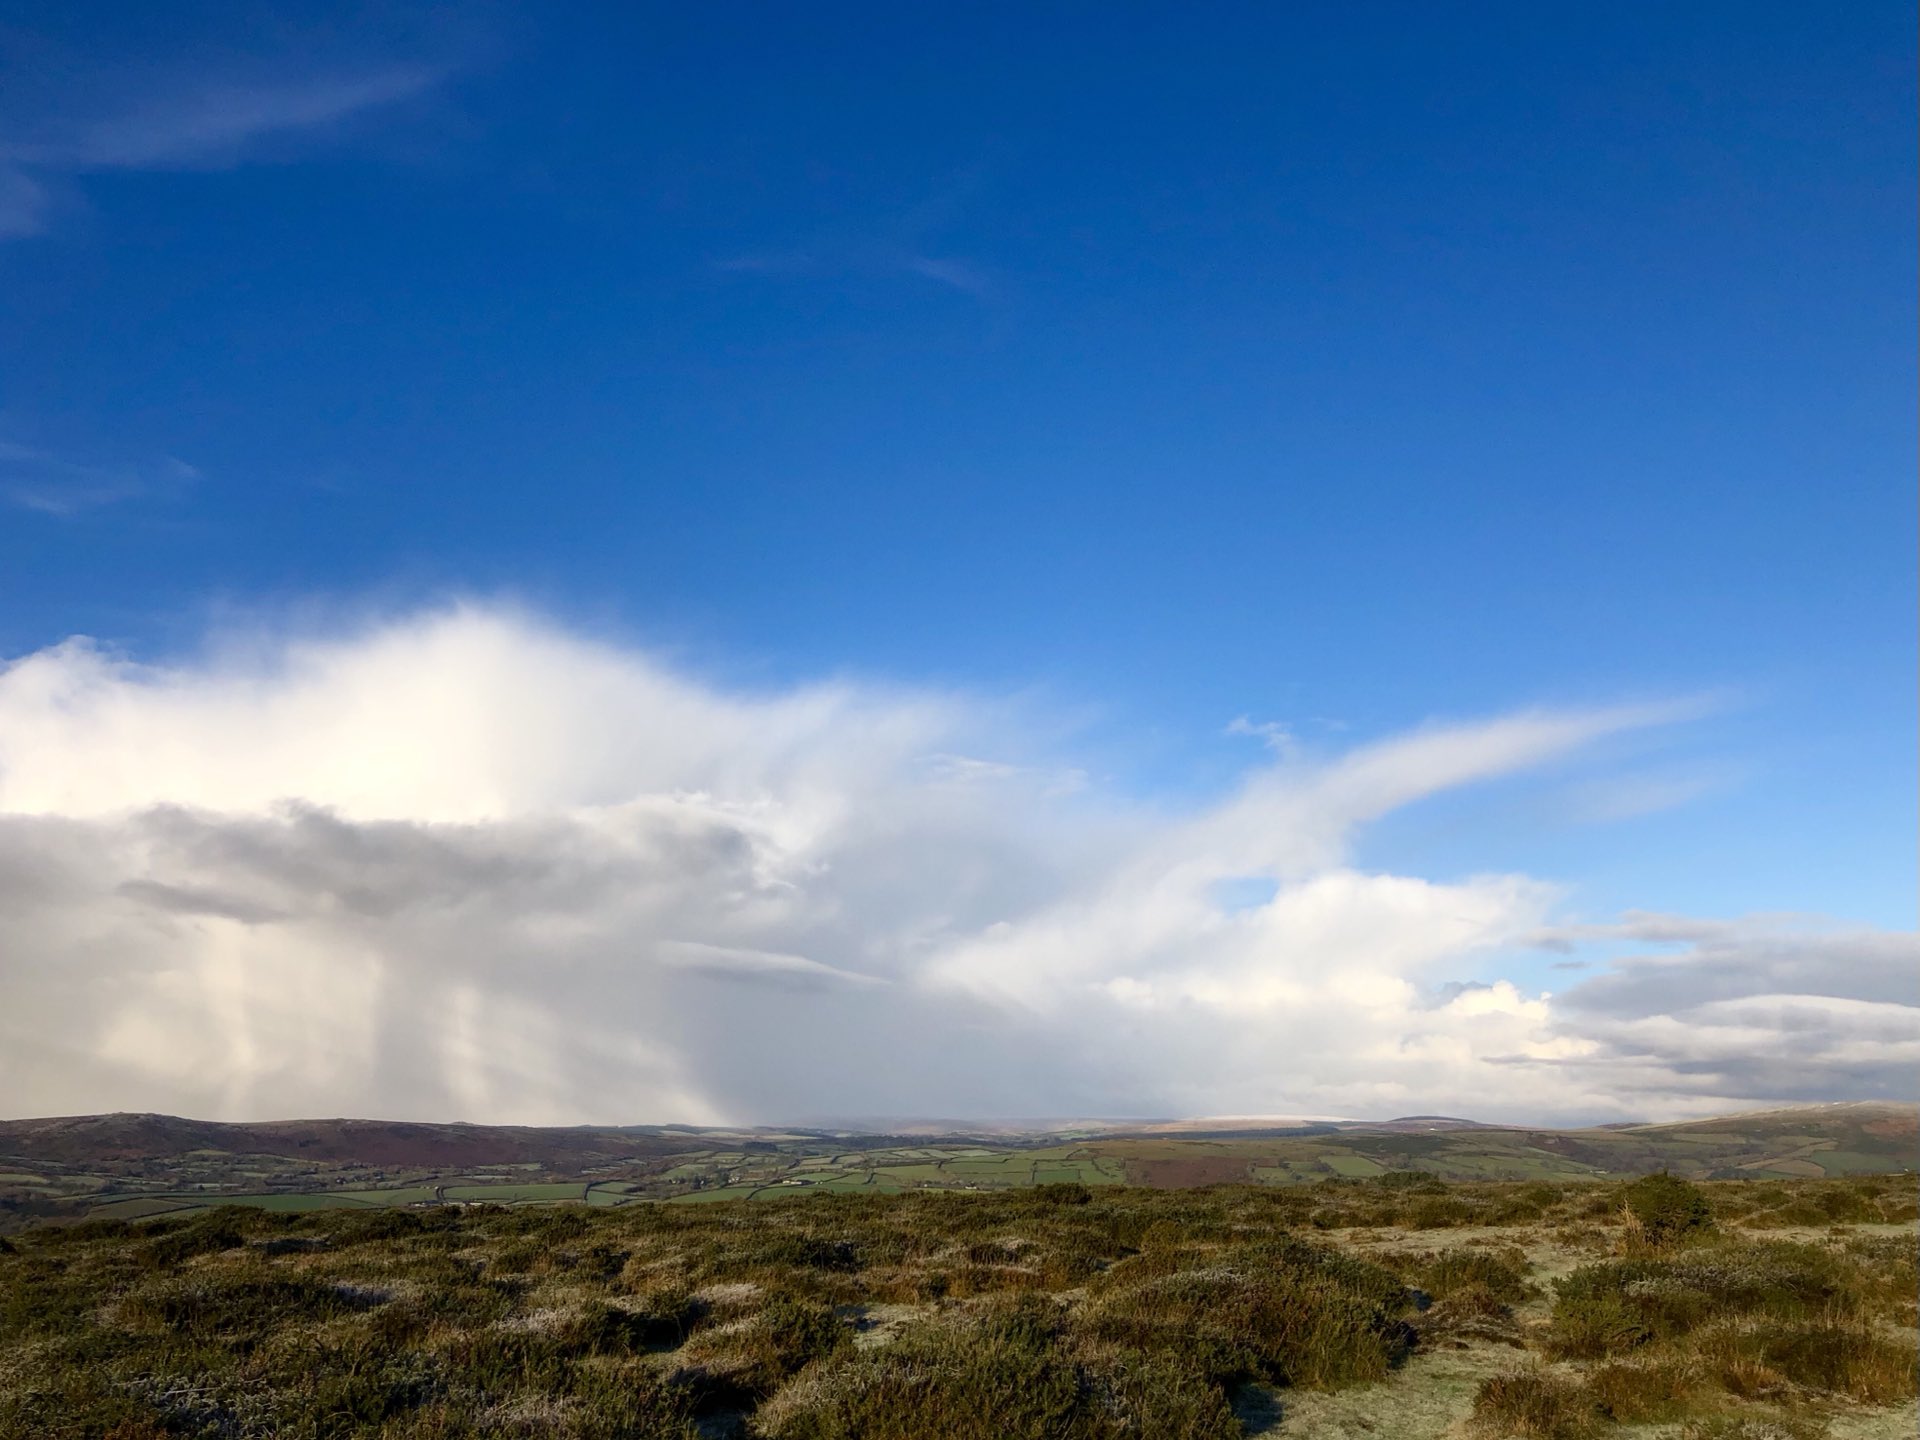 2nd Place Snow showers over Princetown, Dartmoor, Devon by Tracey’s Photos of Devon @TraceysPhotos